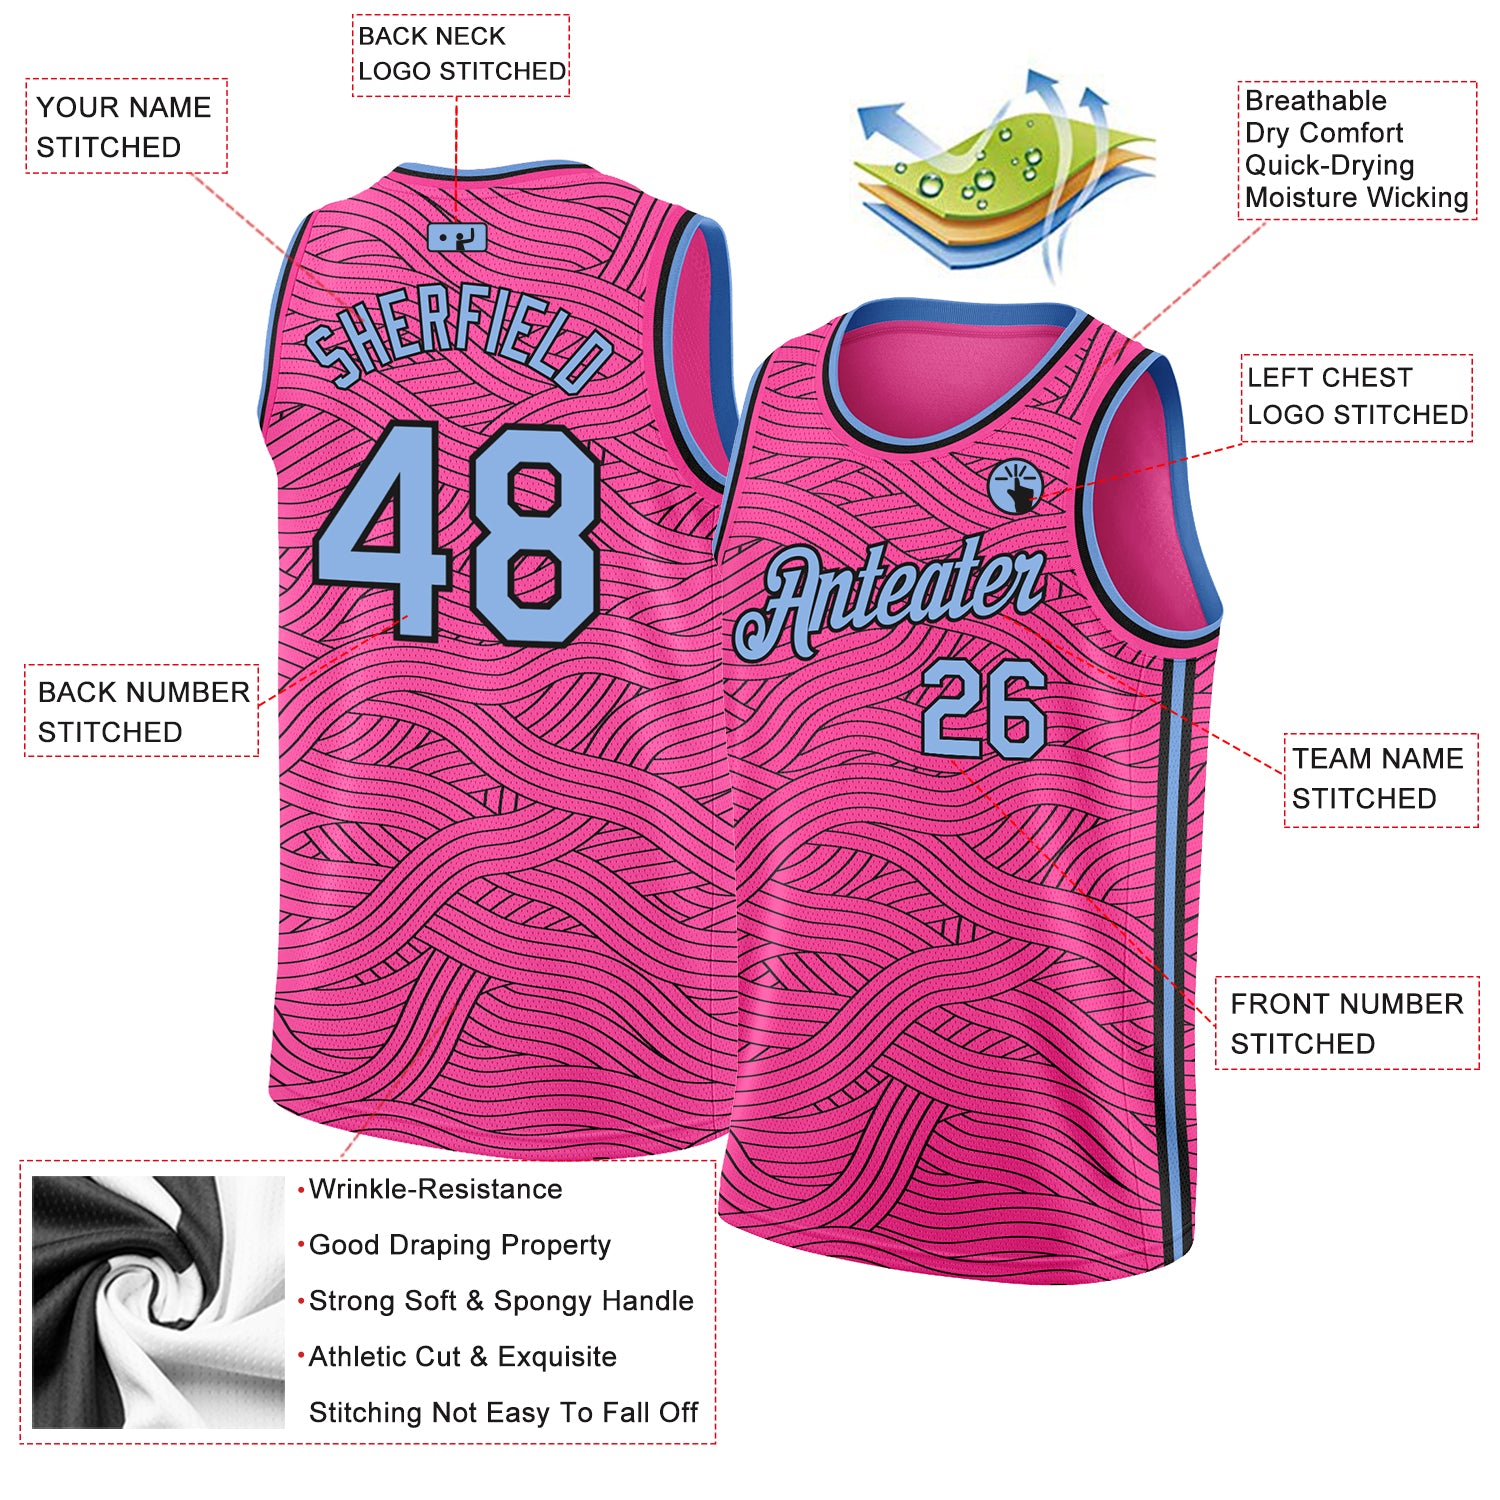 Miami Heat Pink Jersey : Famous basketball team and player jersey on sale